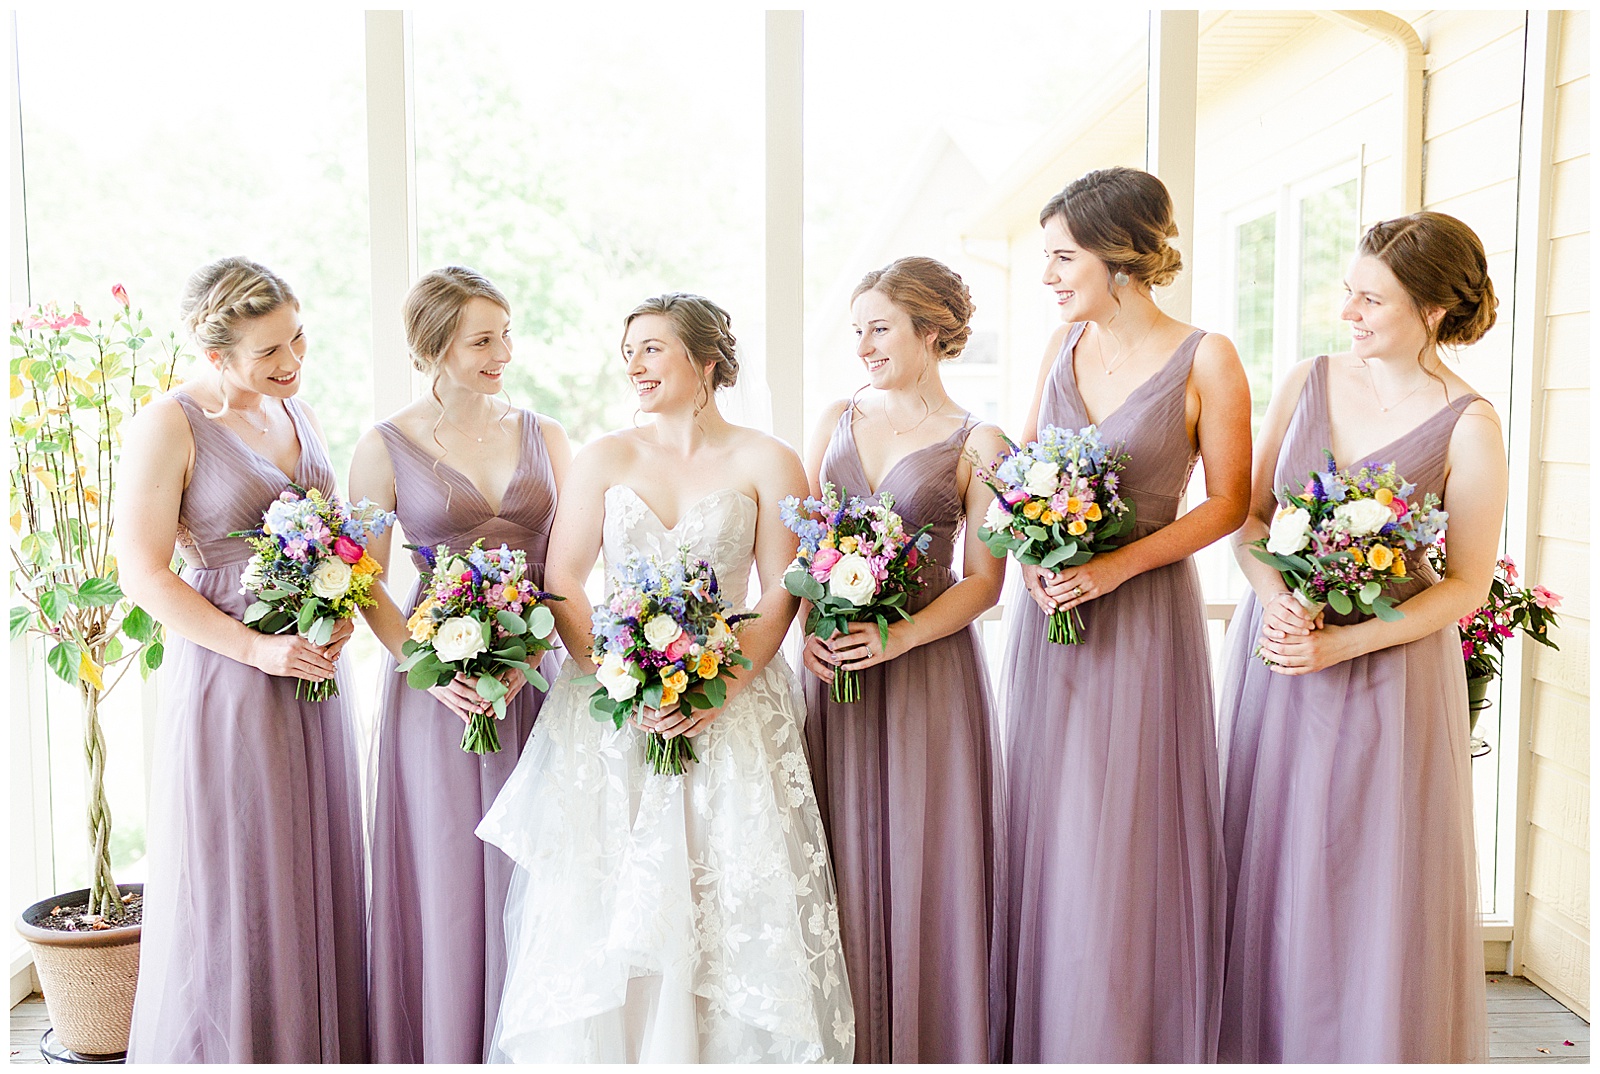 Lavender Purple Bridesmaid Dress Color Theme from Outdoorsy Summer Wedding at North Carolina Lakehouse in the Mountains | check out the full wedding at KevynDixonPhoto.com